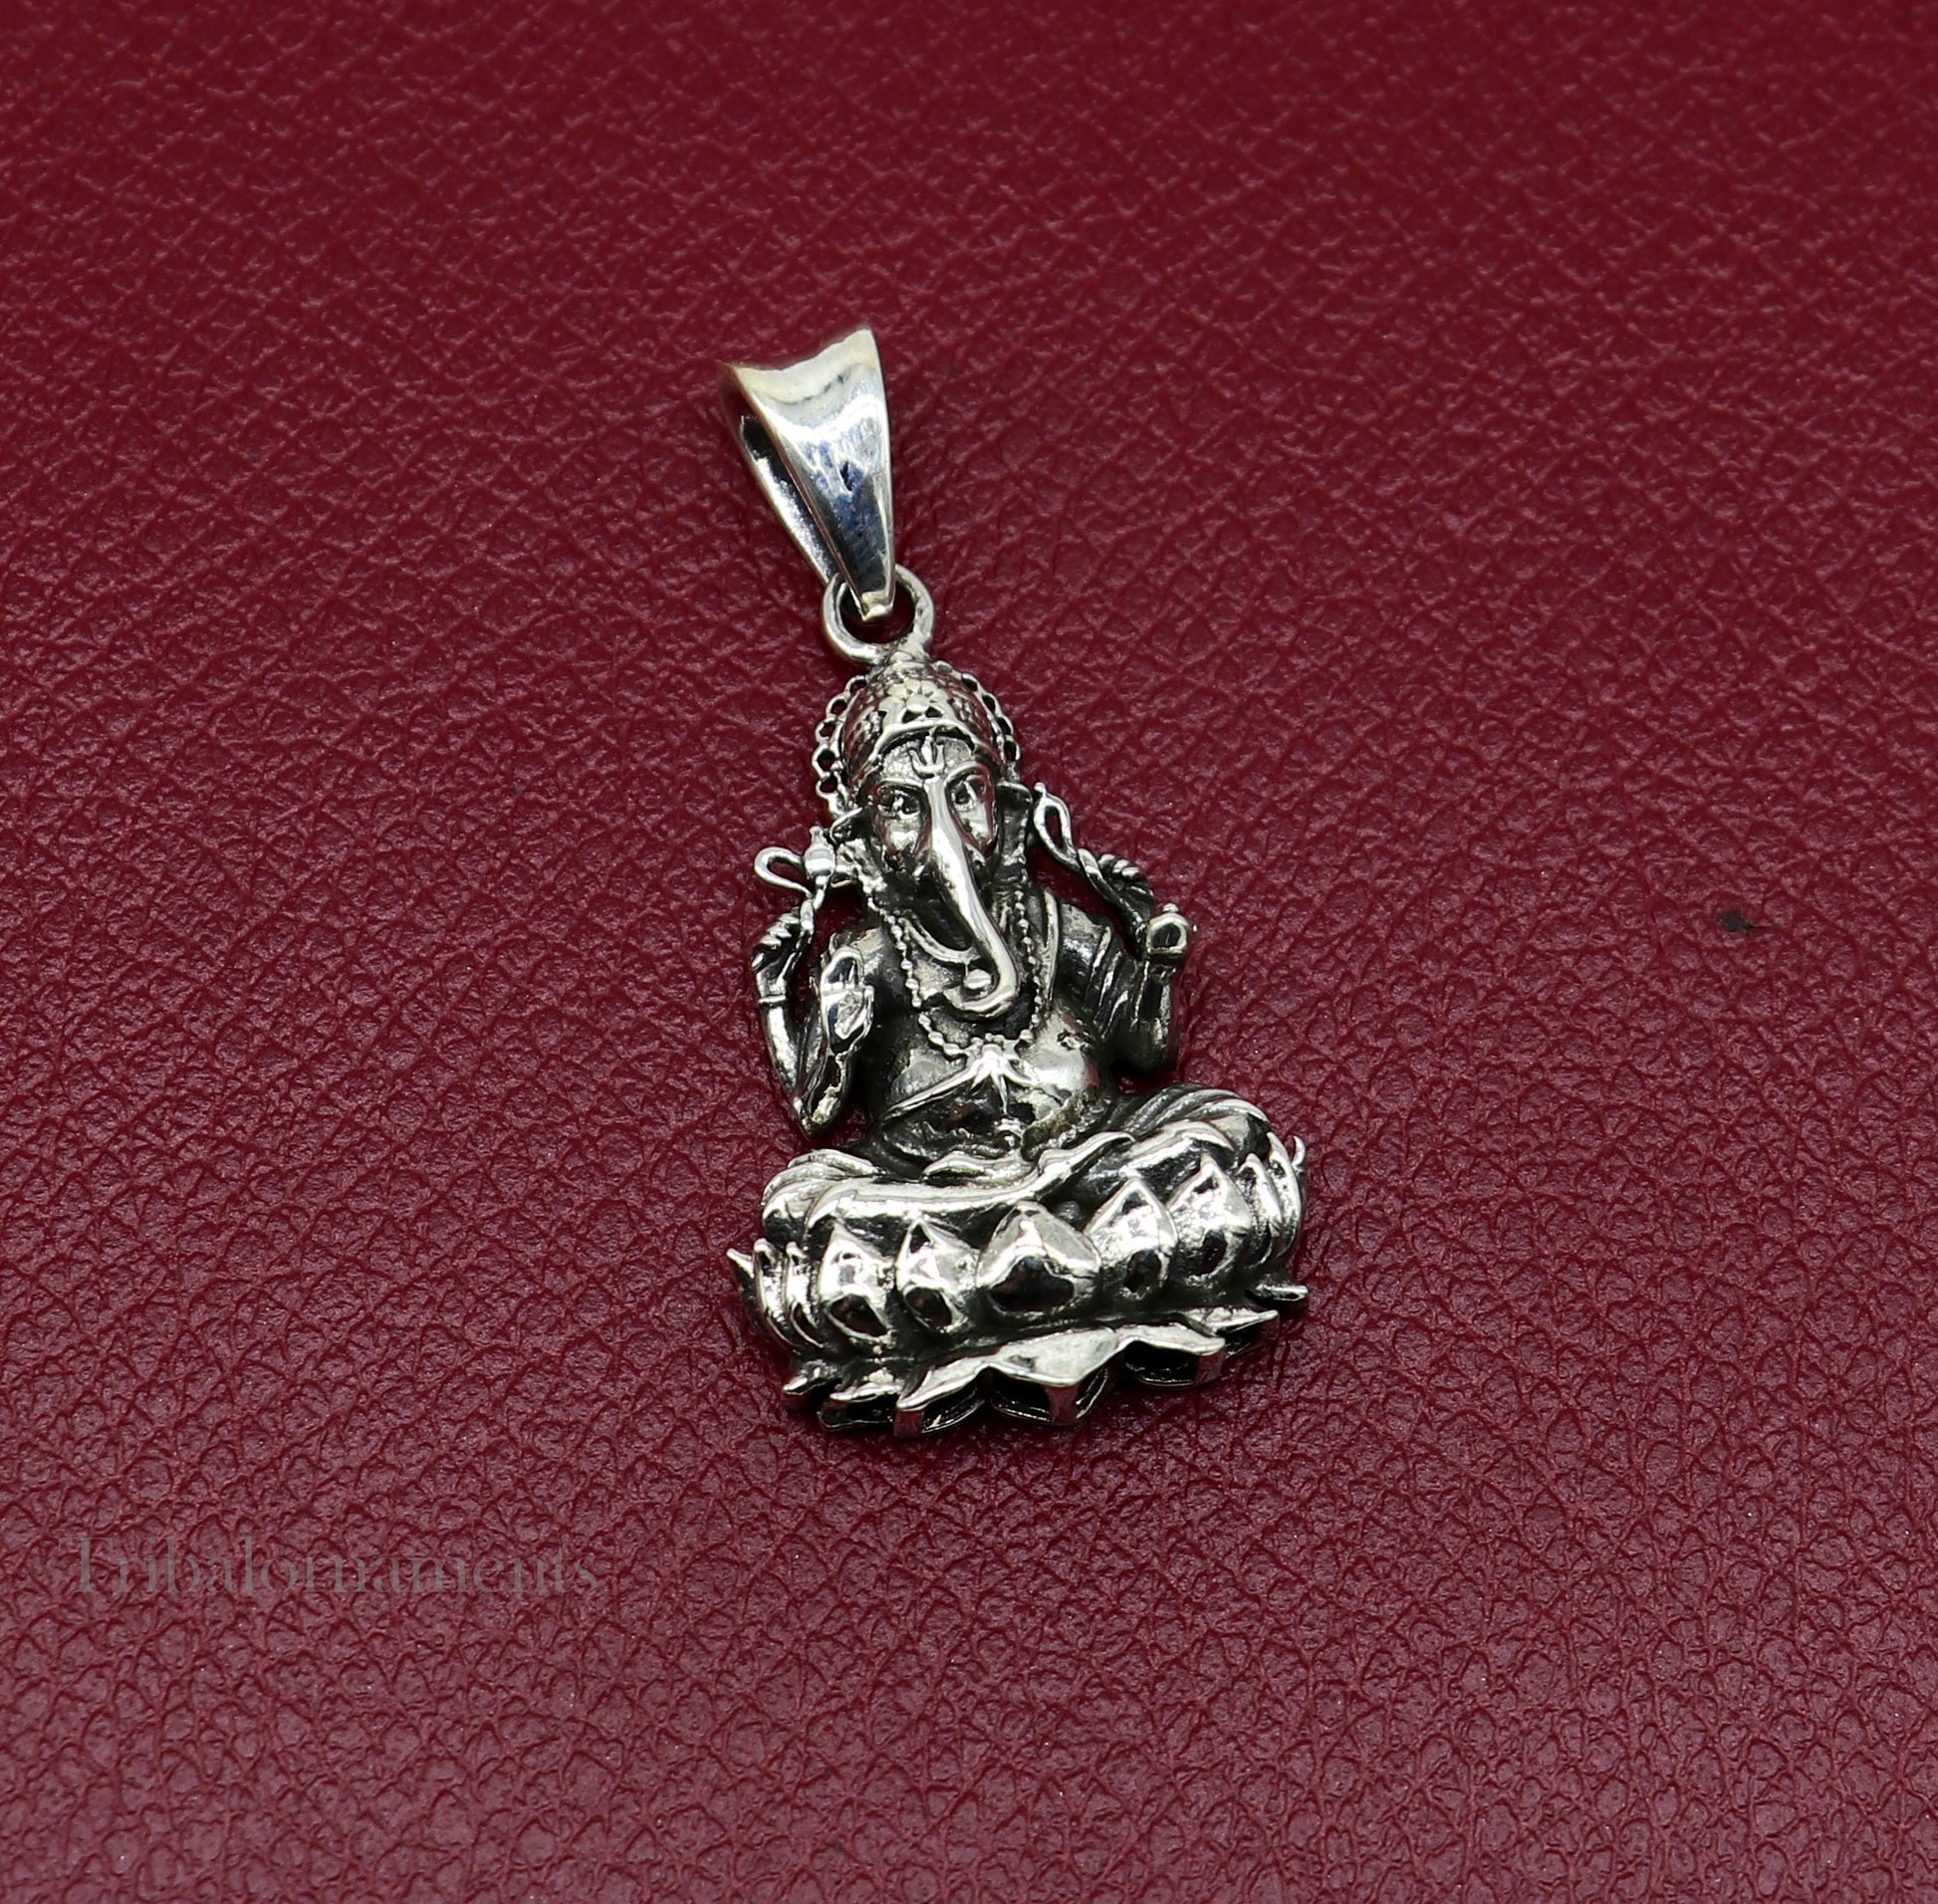 Divine lord Ganesha sitting on lotus blessing pendant, excellent vintage designer 925 sterling silver handmade jewelry from india ssp959 - TRIBAL ORNAMENTS